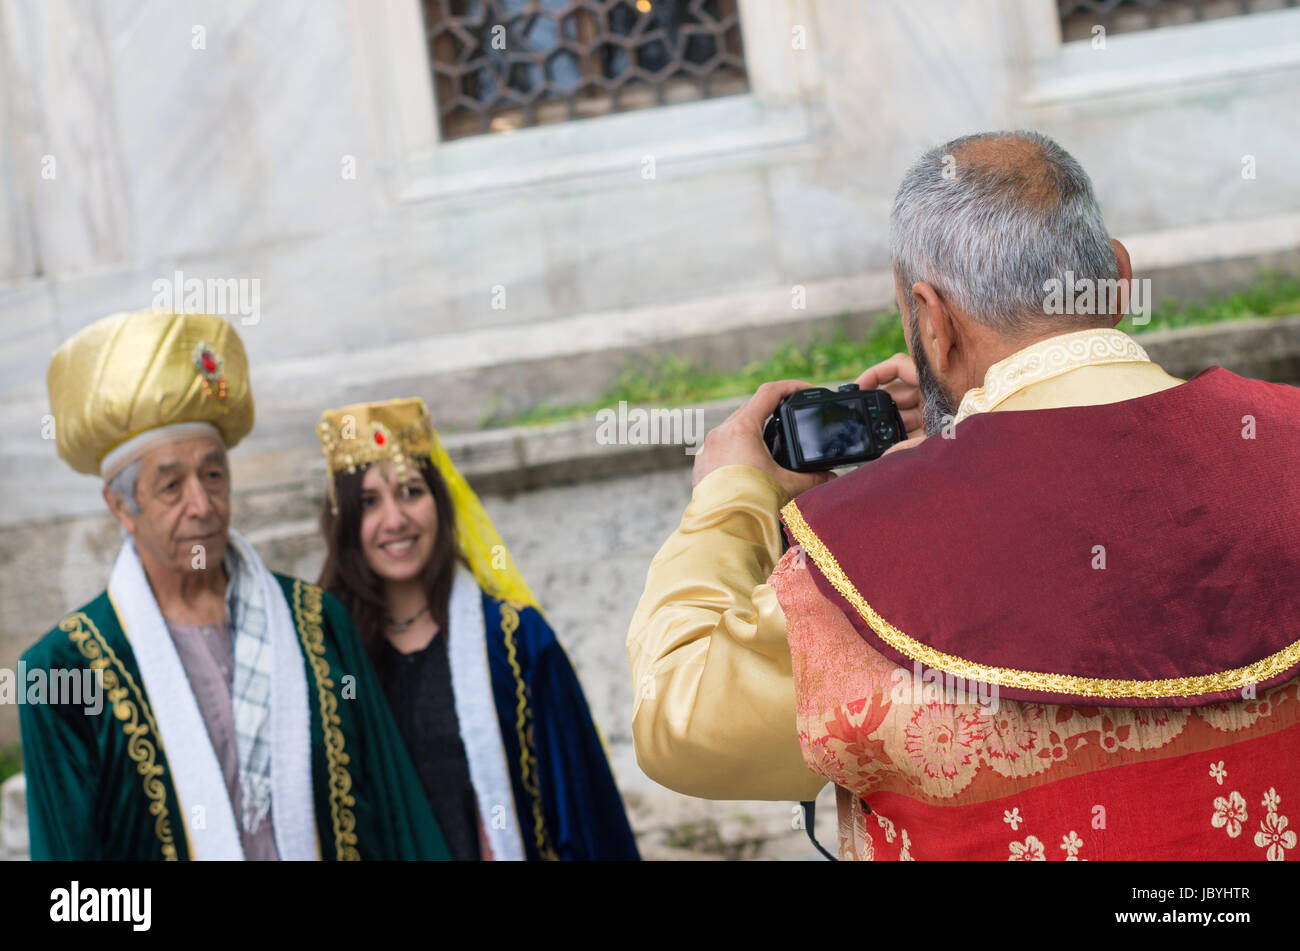 traditional turkish man taking pics of some dressed tourists. Istanbul is one of the most important tourism spots not only in Turkey but also in the world. Stock Photo